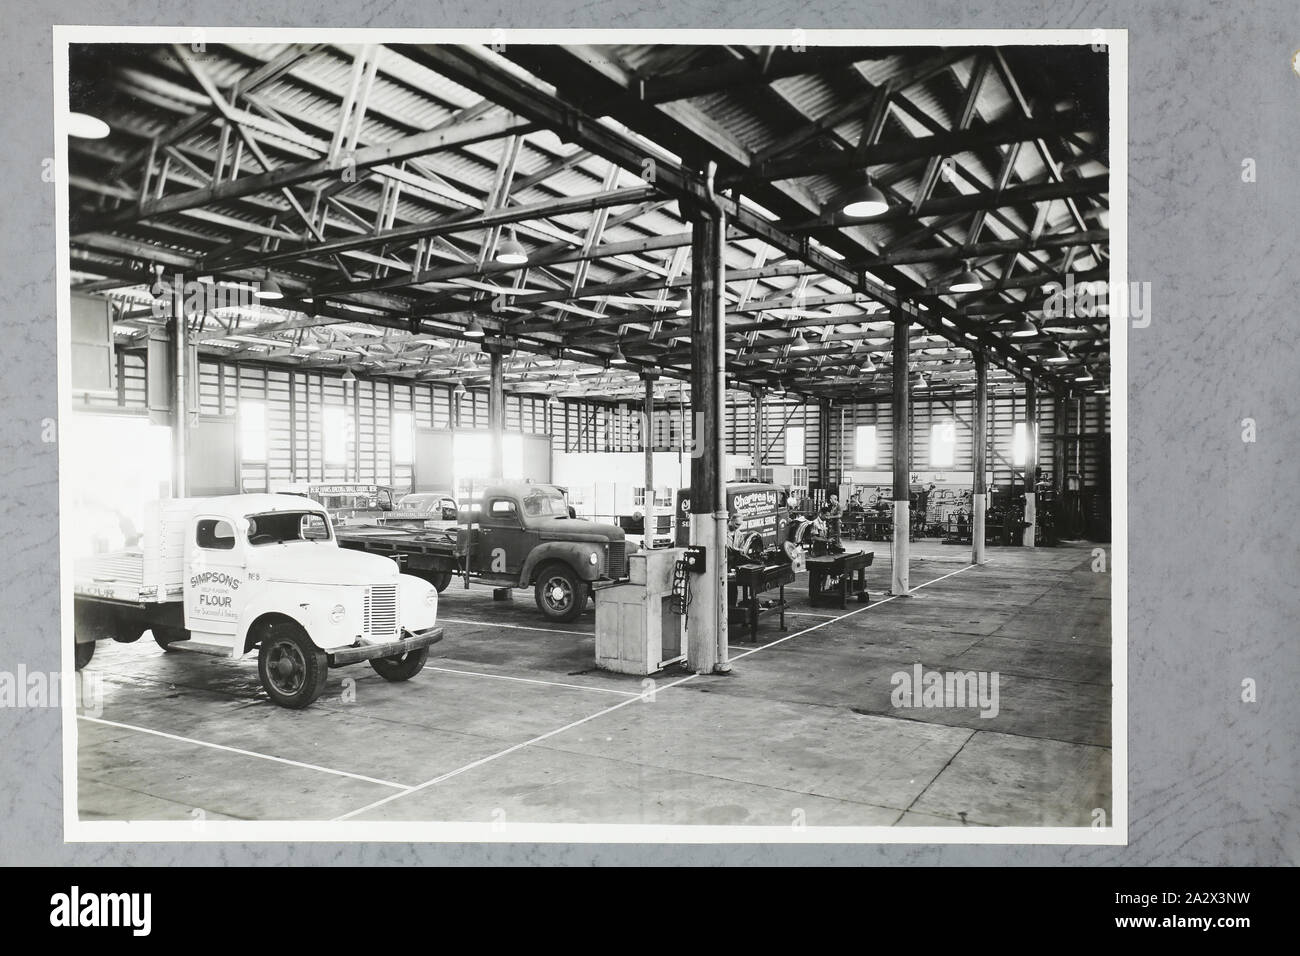 Photograph - International Harvester, Truck Service Workshop Interior, Brisbane, 09 Jan 1947, One of four black and white photographs attached to an album page. The page is one of 28 that previously made up a photograph album containing black & white photographs of the International Harvester Company's state branch offices and showrooms throughout Australia. Part of a large collection of glass plate and film negatives, transparencies, photo albums, product catalogues, videos Stock Photo